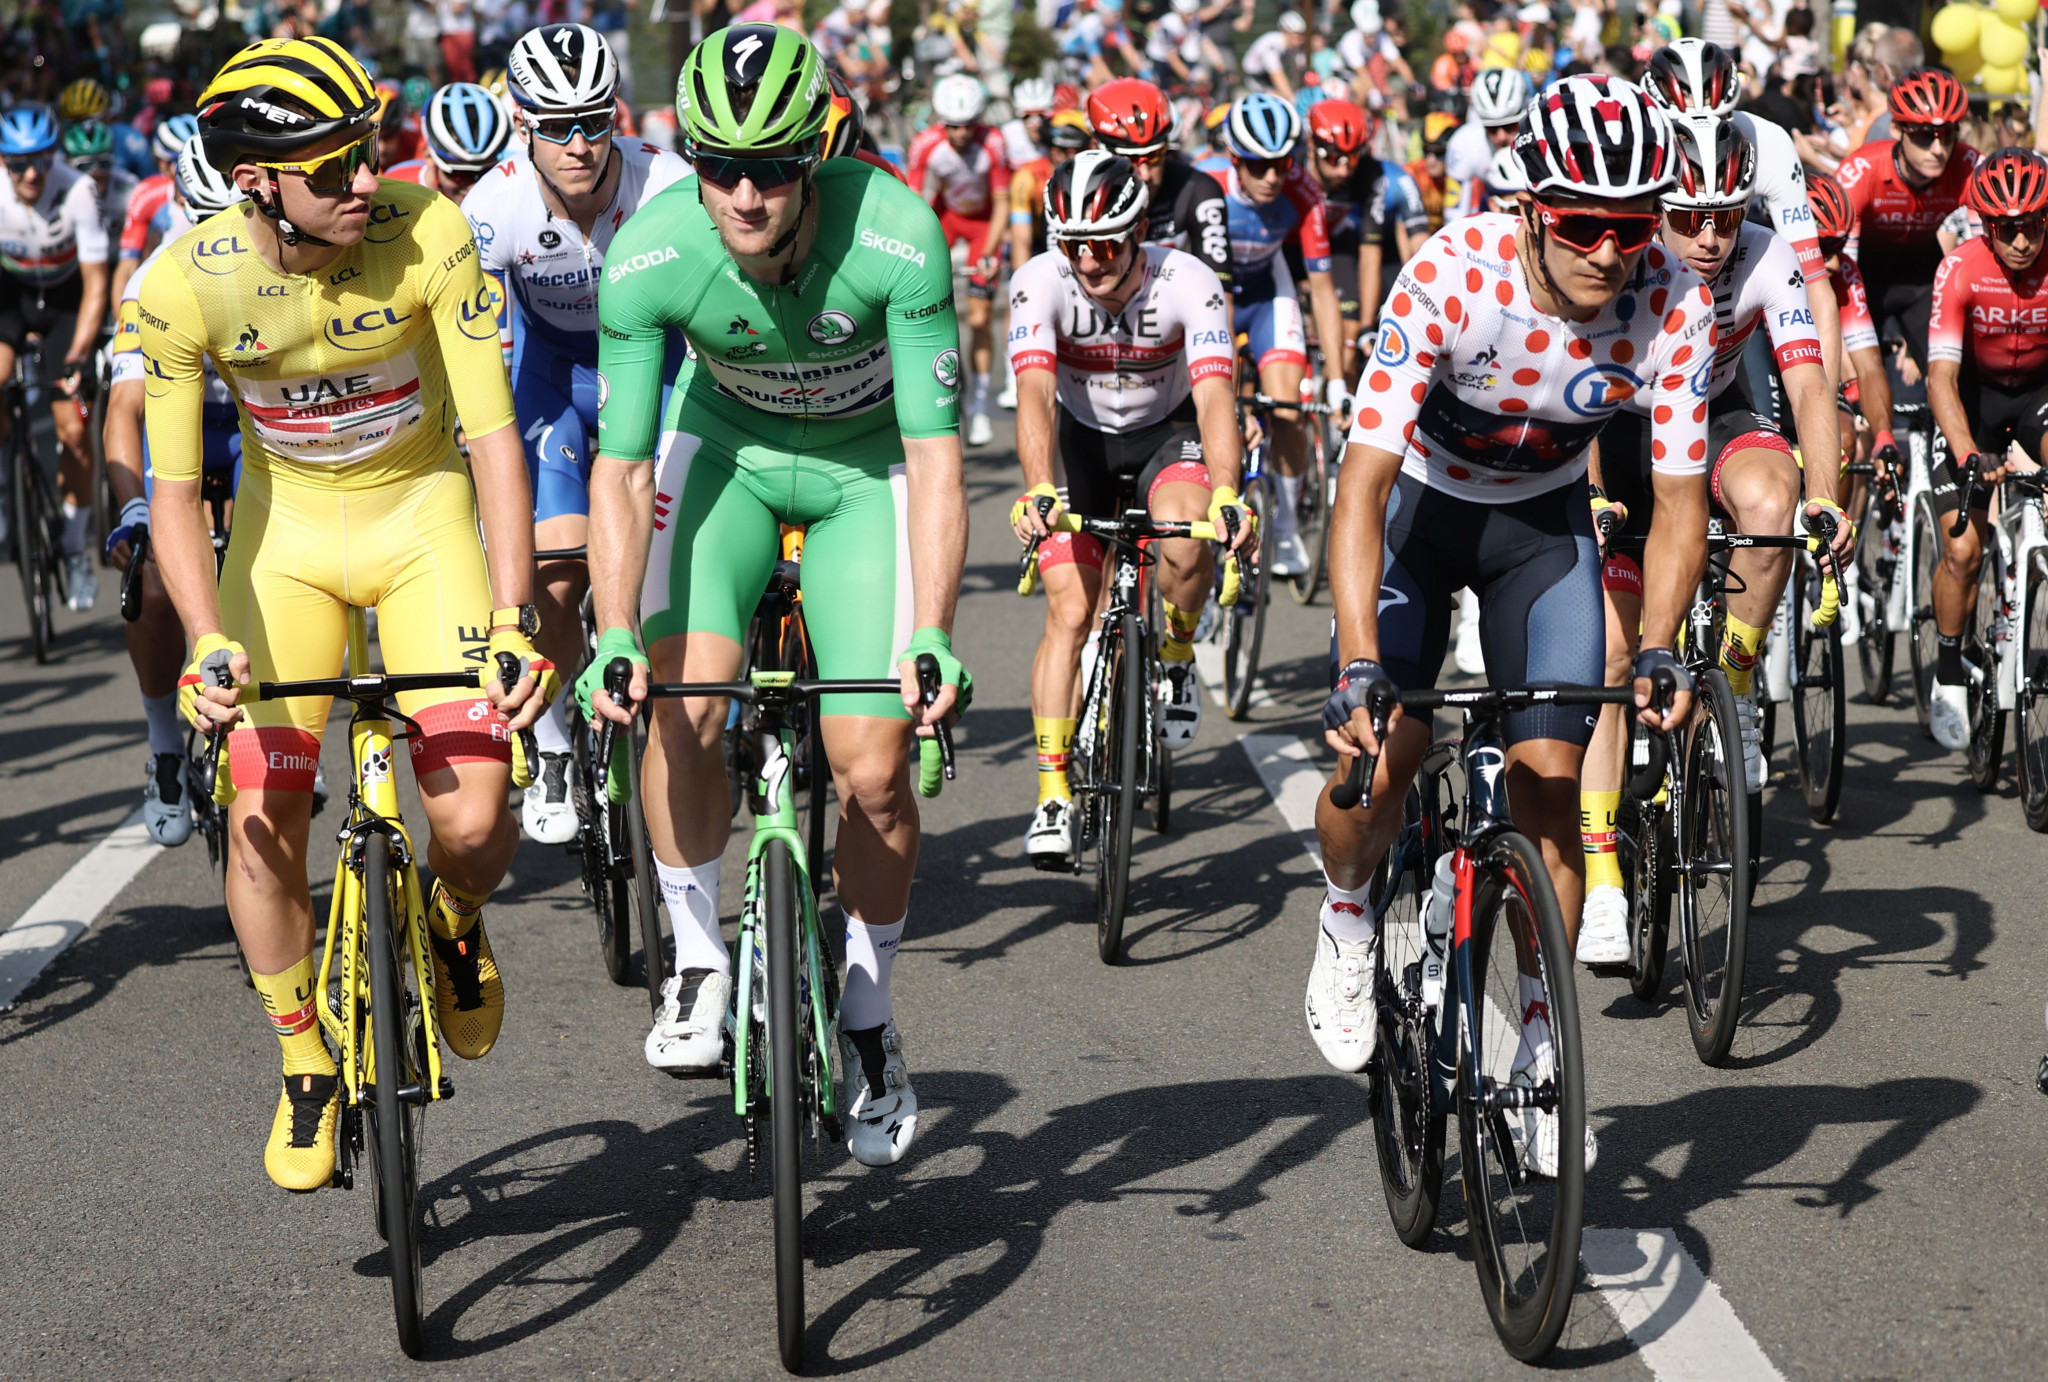 The ceremonial final stage took the riders into Paris ©Getty Images